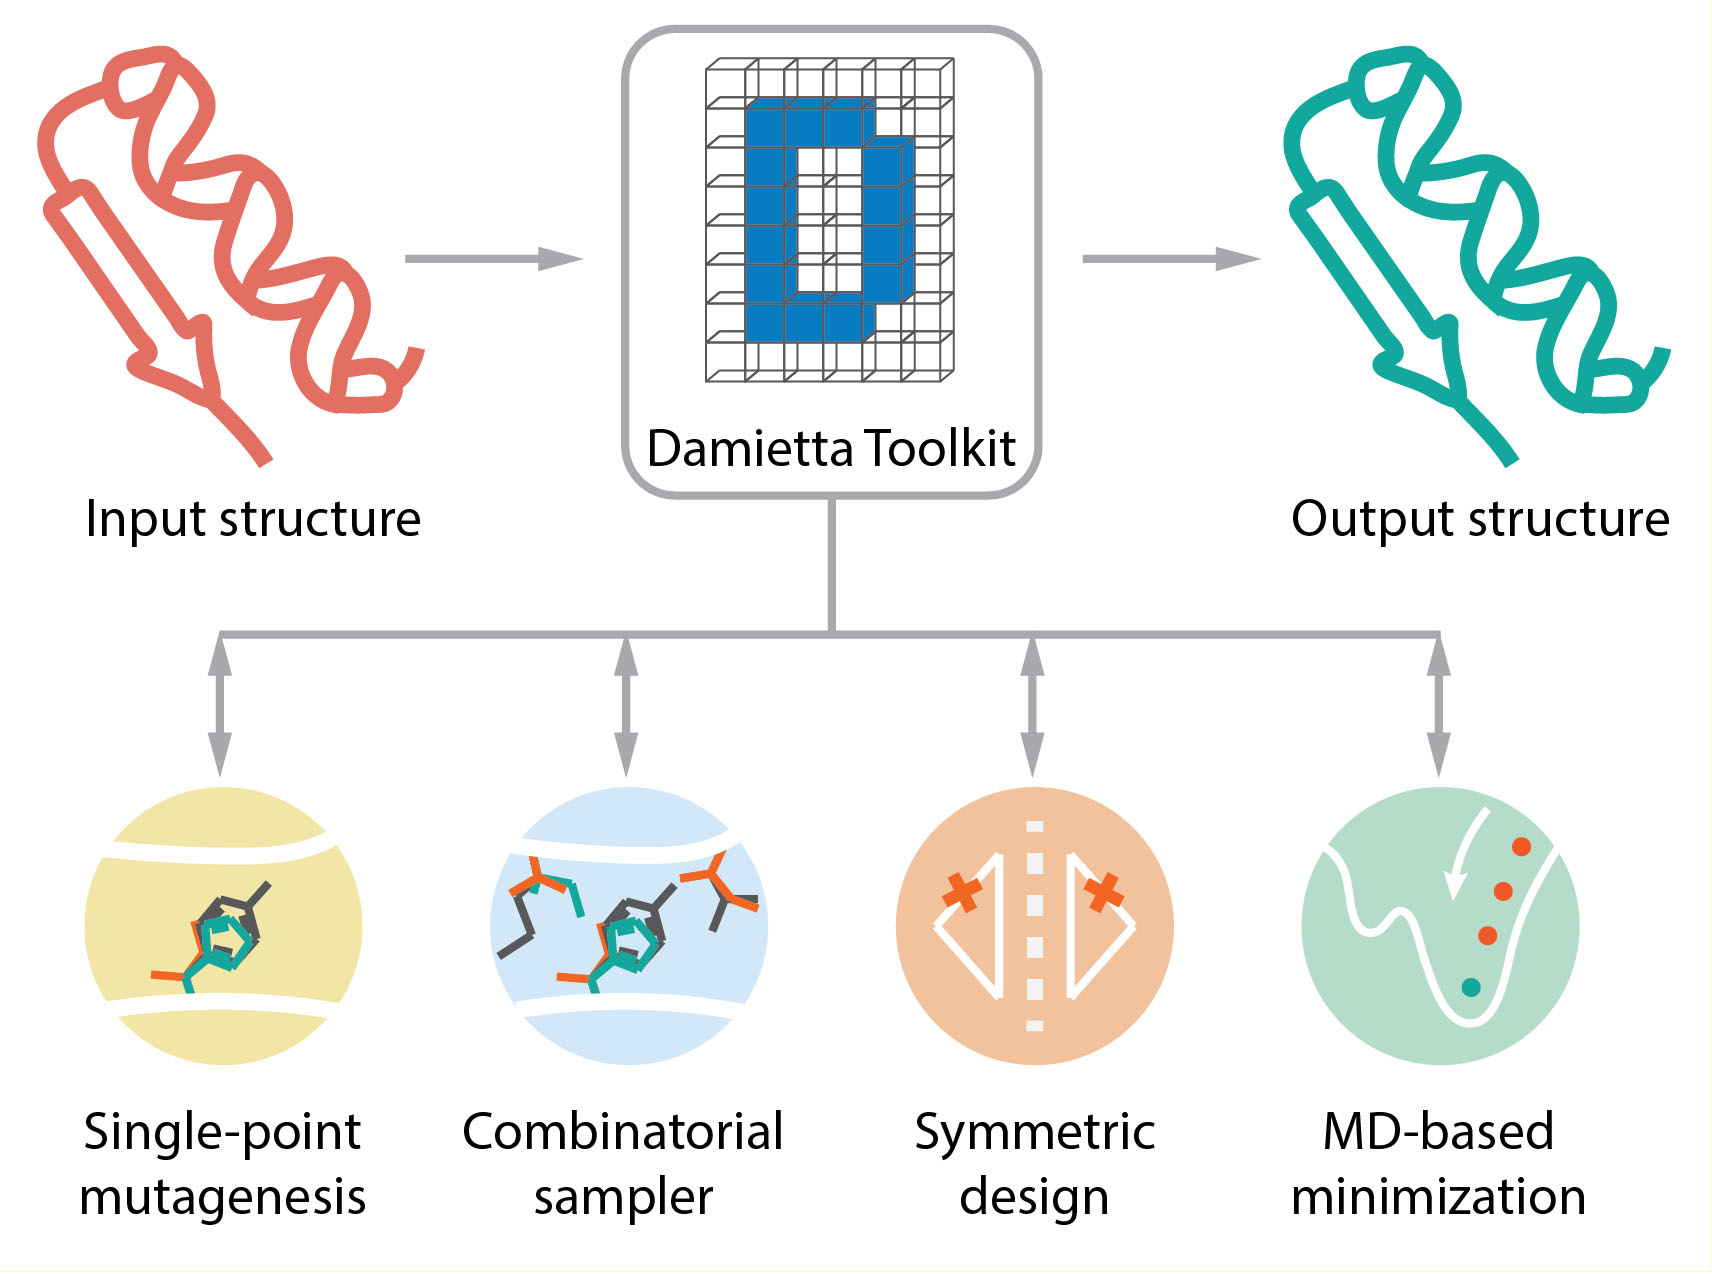 The Damietta Server seamlessly integrates different protein design tools and provides their interoperability